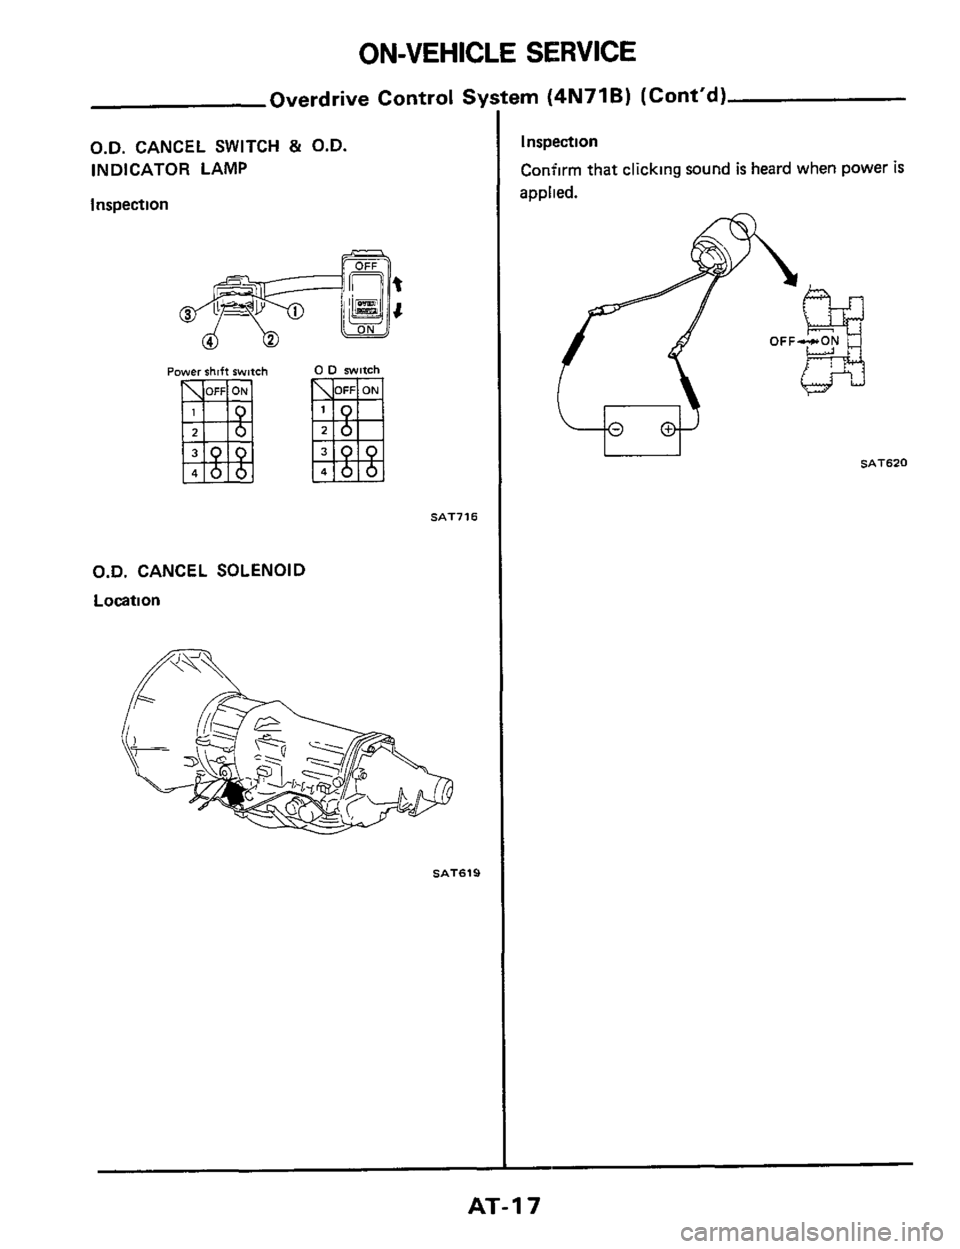 NISSAN 300ZX 1984 Z31 Automatic Transmission Workshop Manual ON-VEHICLE SERVICE 
Overdrive Control Sy: 
O.D. CANCEL  SWITCH 81 O.D. 
INDICATOR  LAMP 
Inspection 
Power shift switch 
SAT716 
O.D.  CANCEL  SOLENOID 
Location 
SAT619 
?m (4N71B) (Contd) 
Inspecti